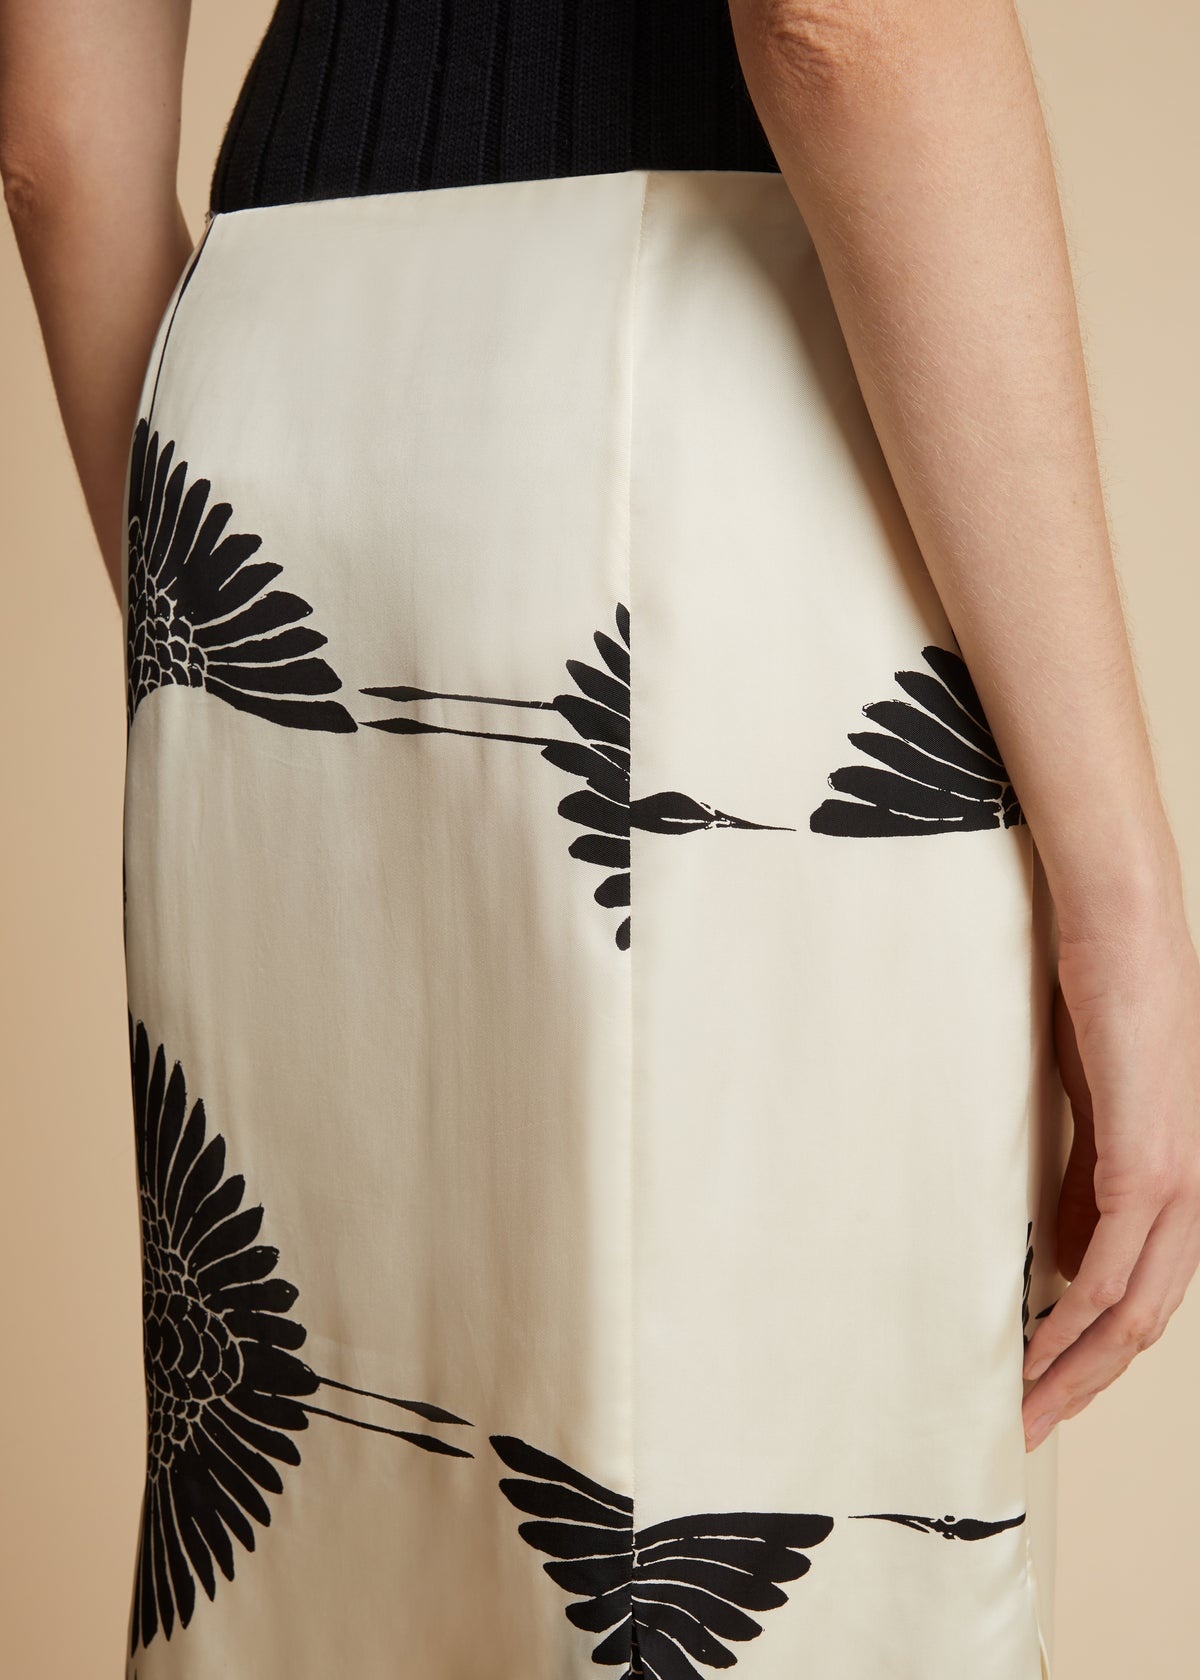 The Levy Skirt in Cream and Black Crane Print - 5